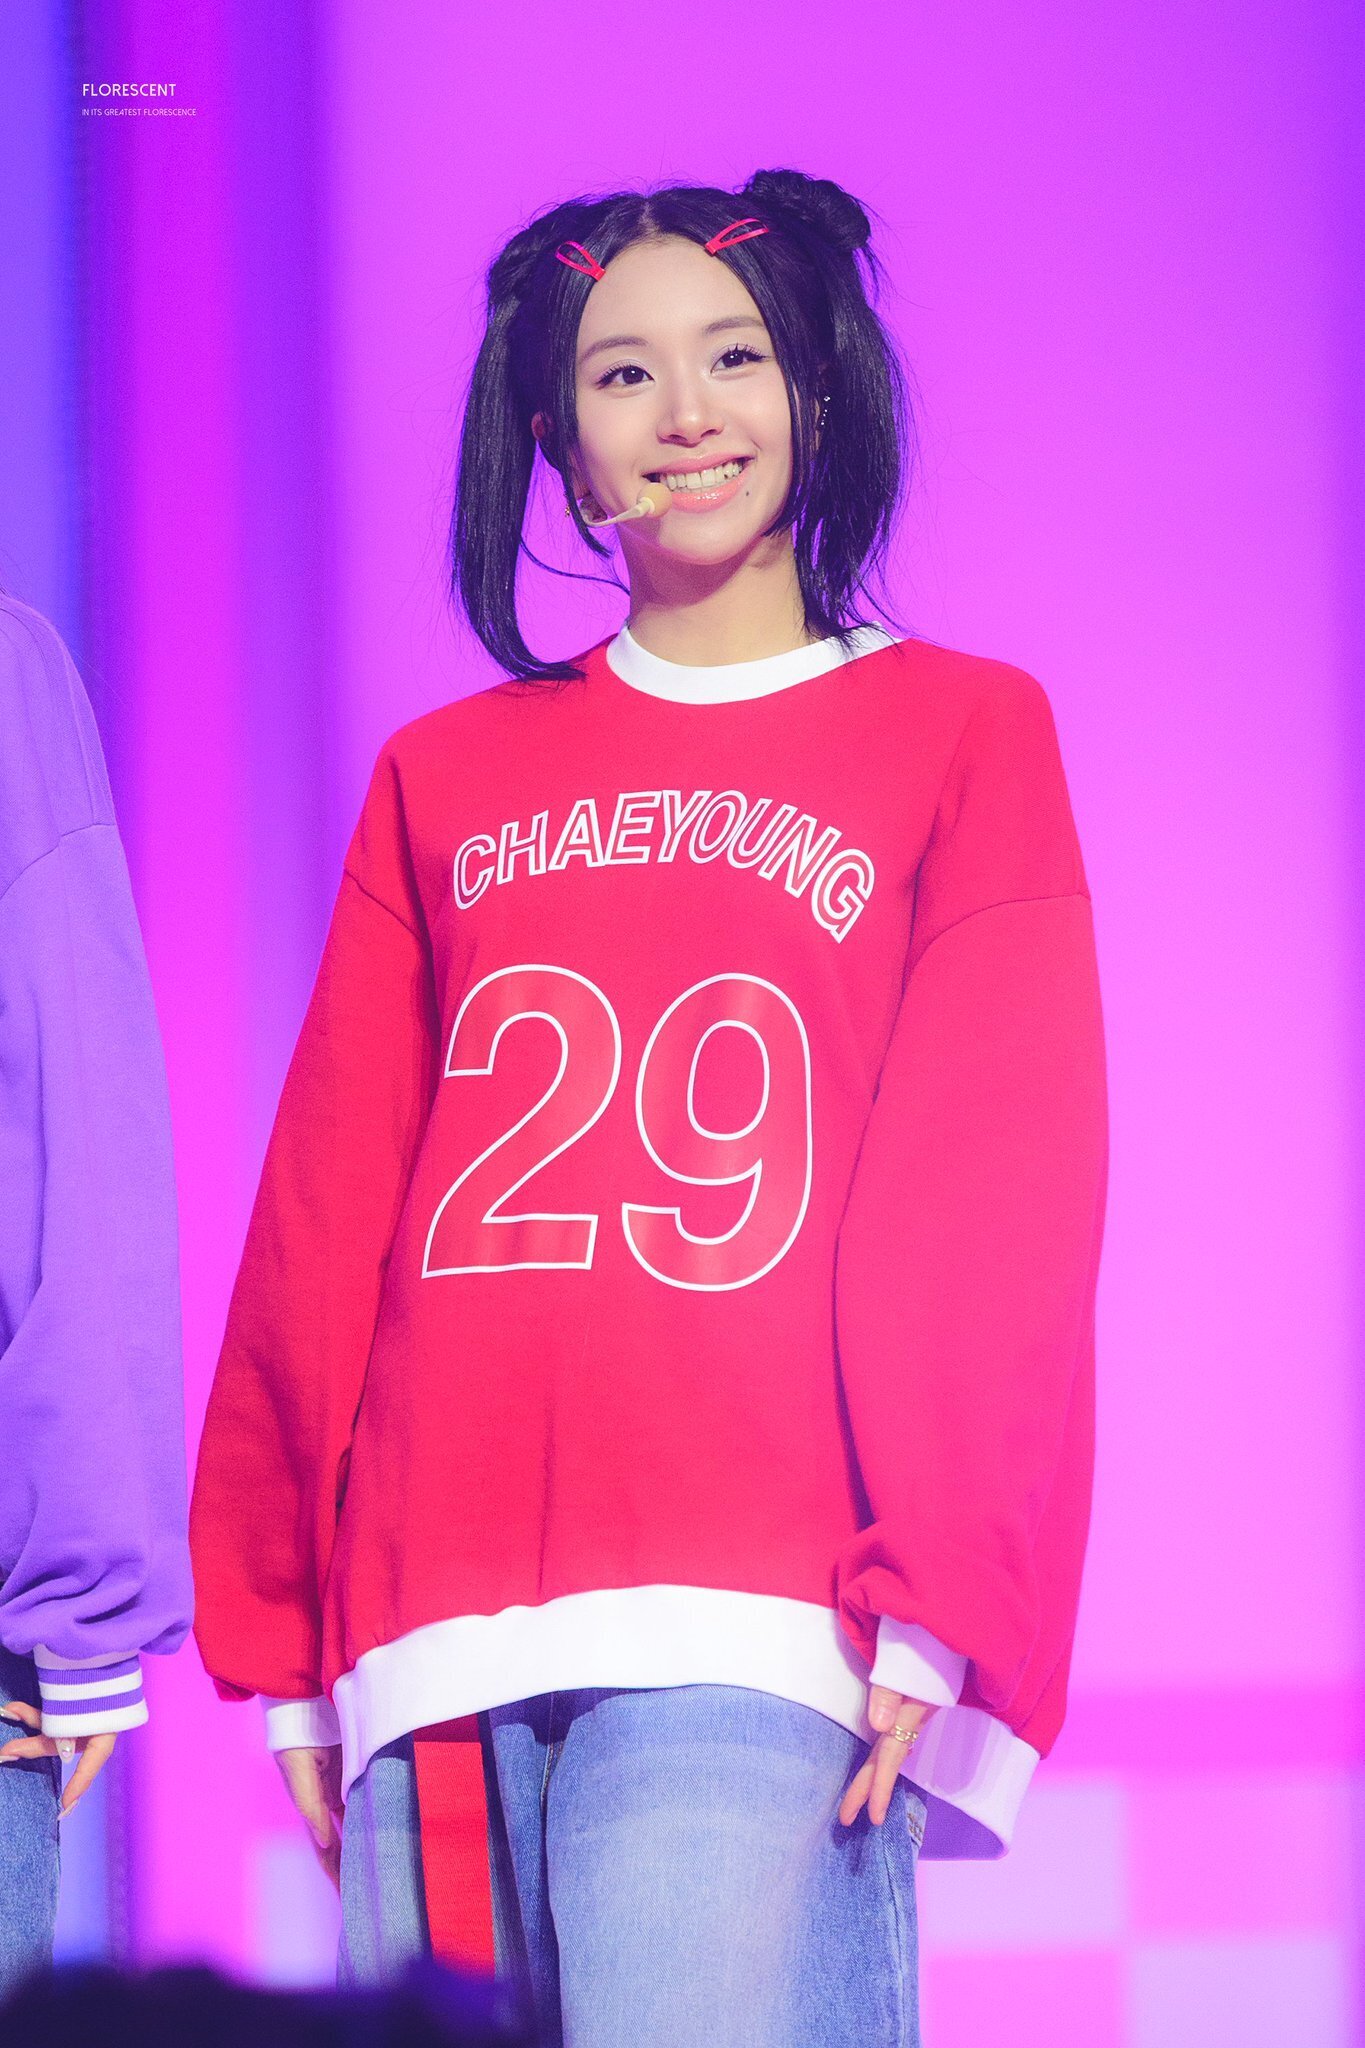 231021 TWICE Chaeyoung - Fan Meeting 'Once Again' | kpopping